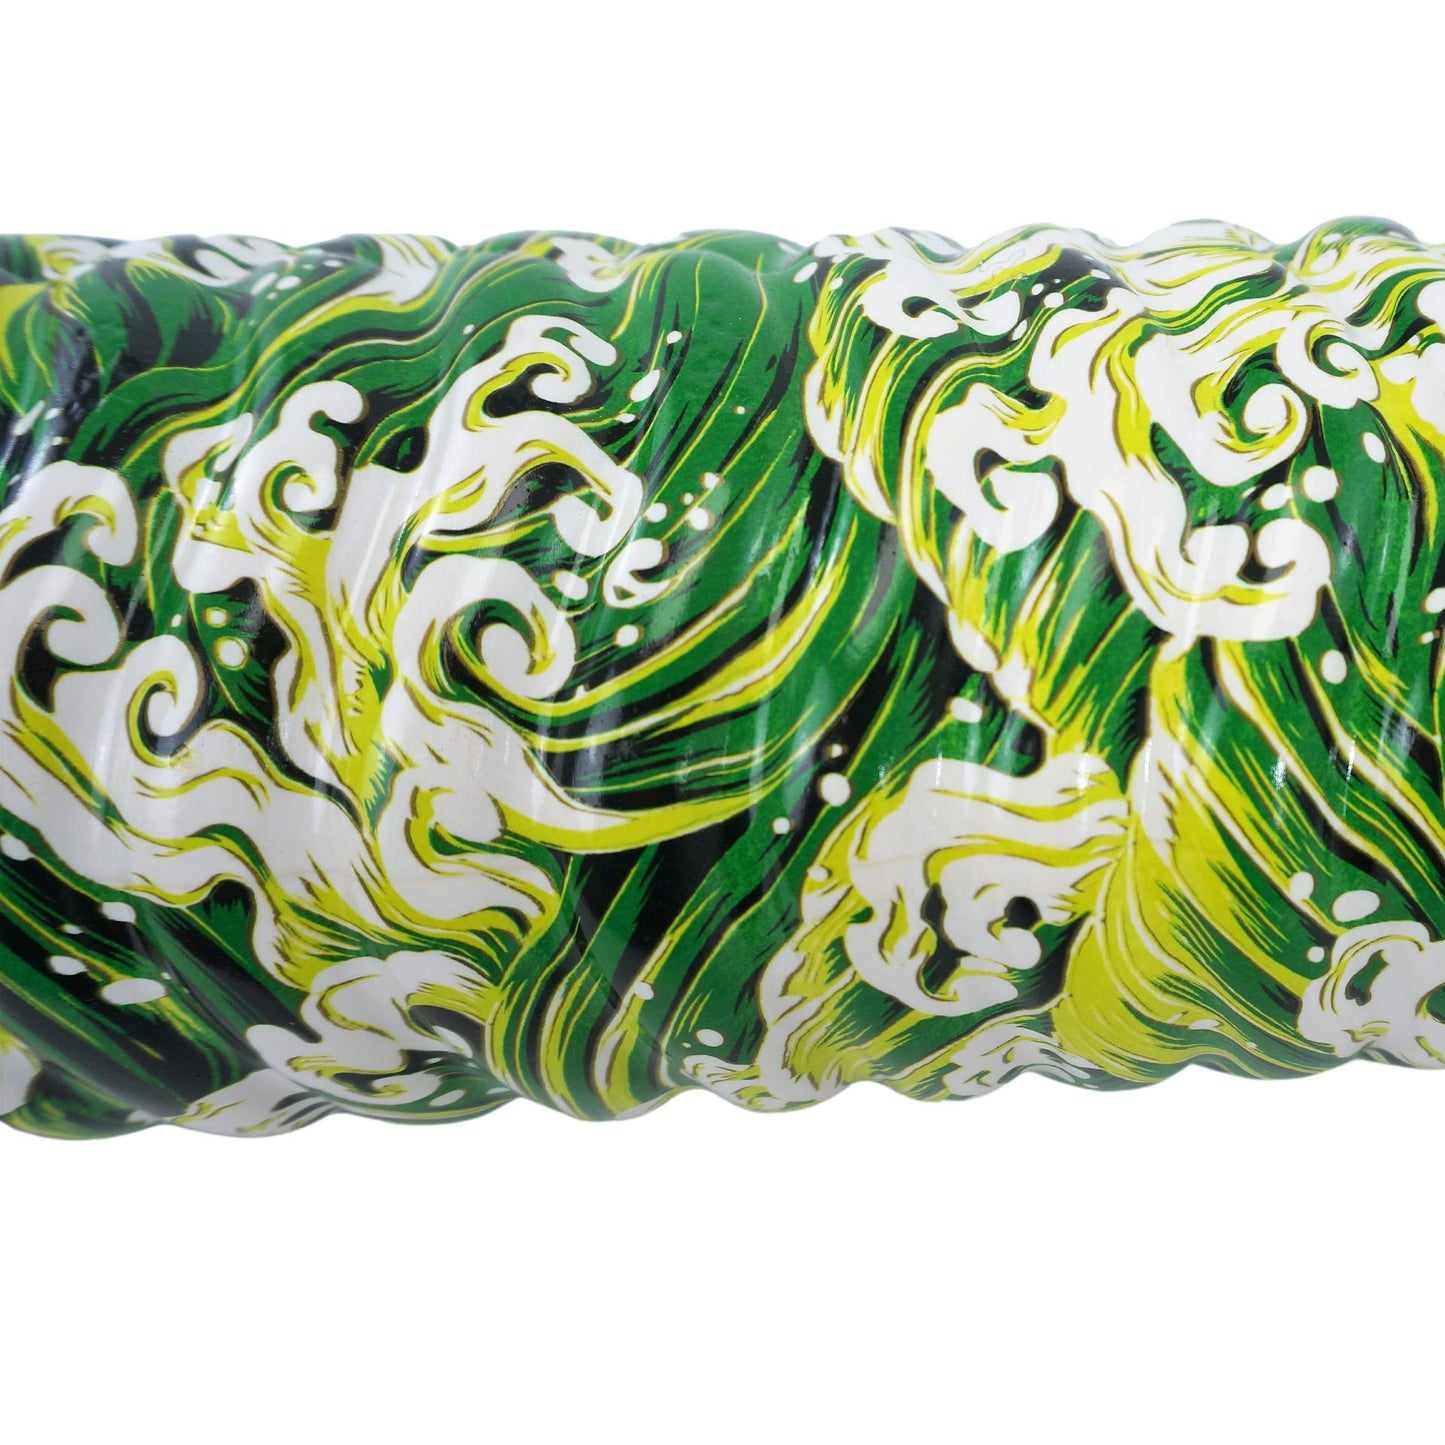 IMMERSA Jumbo Swimming Pool Noodles, Premium Water-Based Vinyl Coating and UV Resistant Soft Foam Noodles for Swimming and Floating, Lake Floats, Pool Floats for Adults and Kids. Green Spoondrift